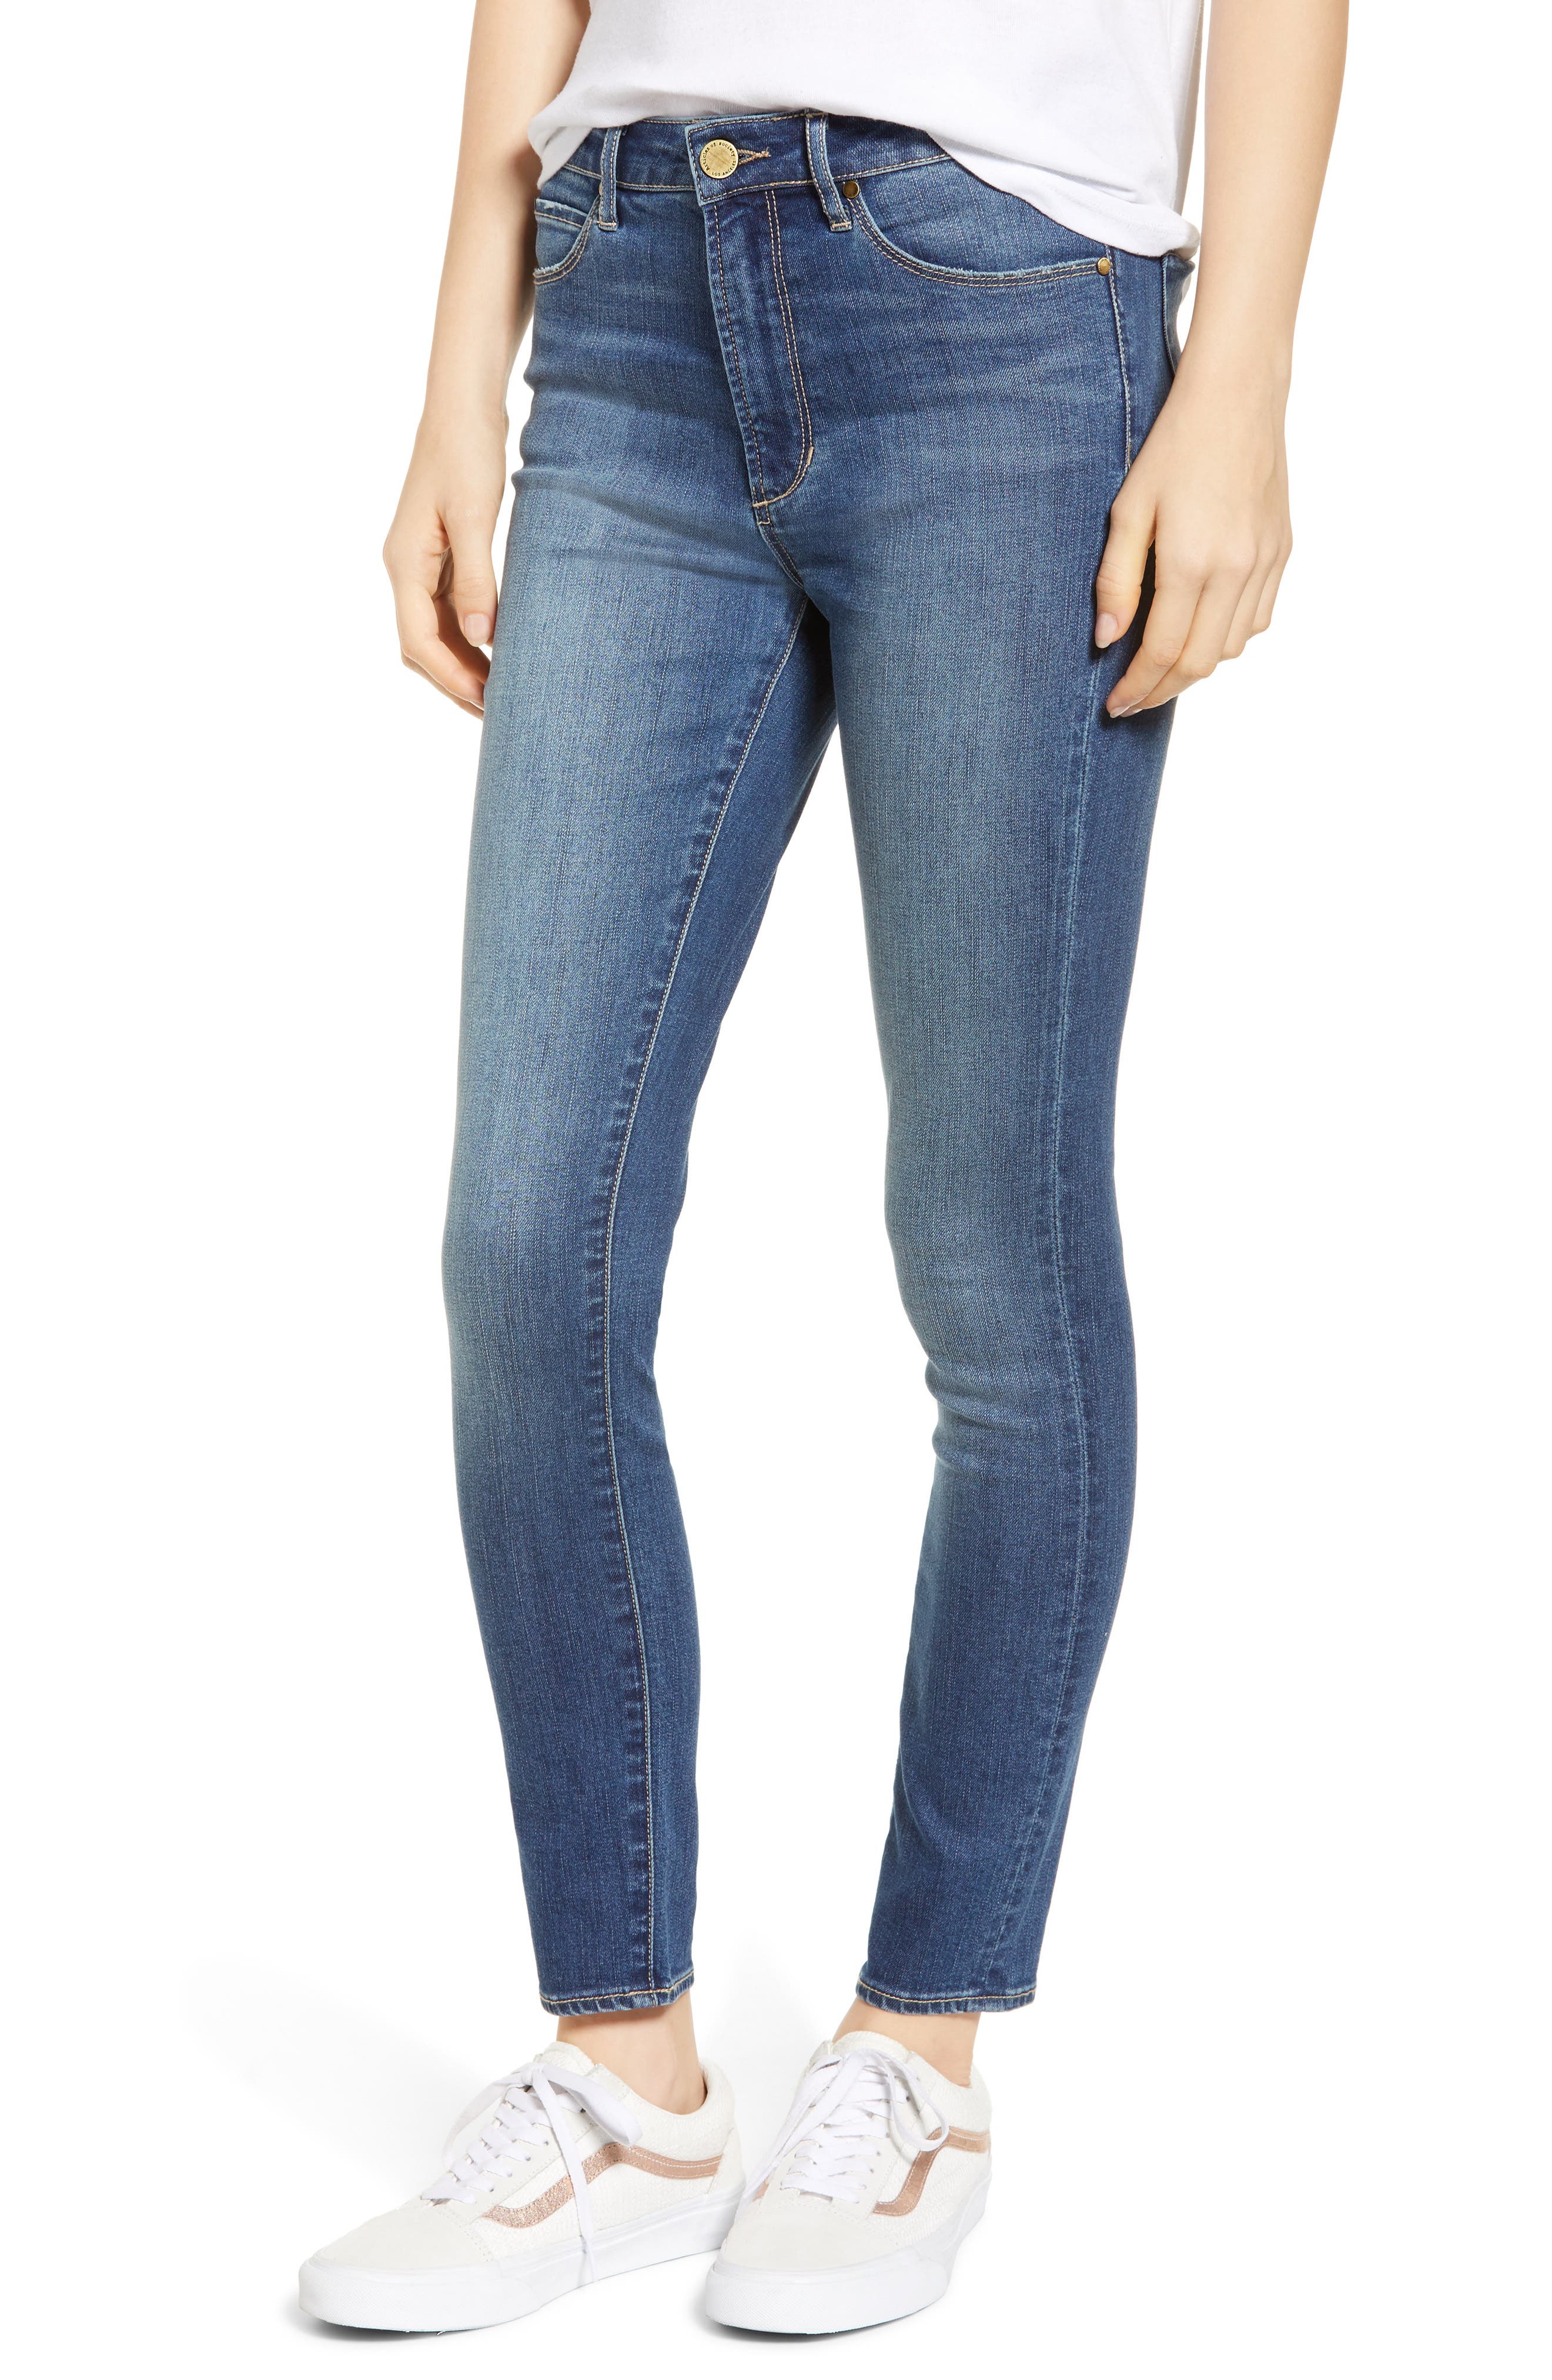 articles of society jeans nordstrom